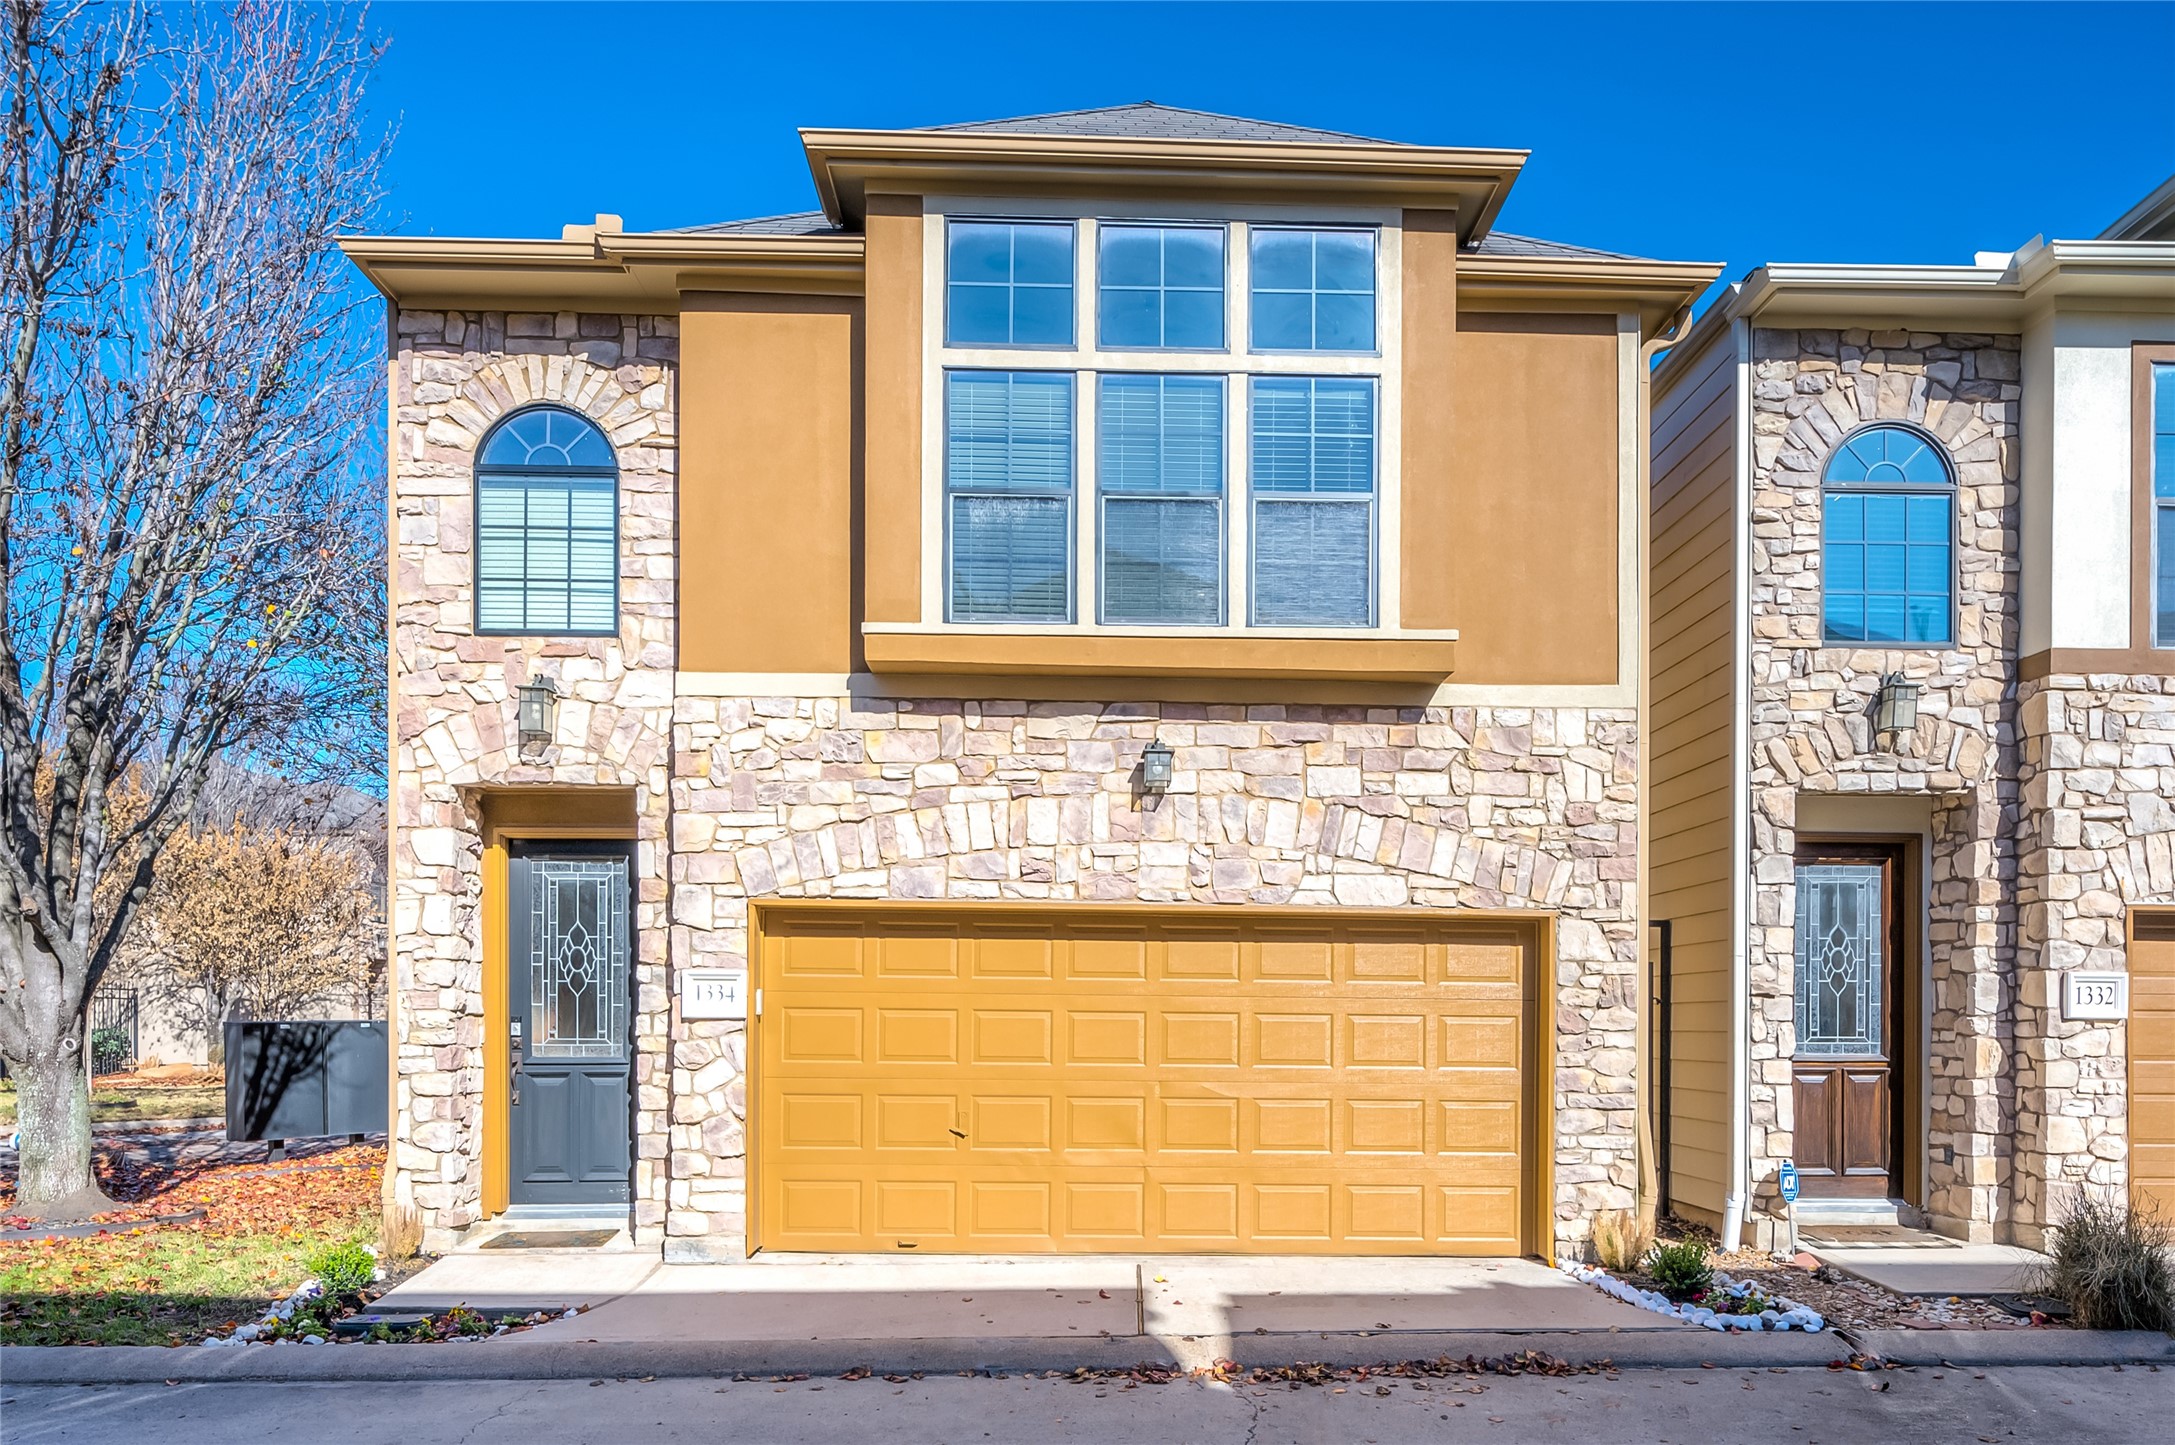 Marvelous 2-story home in gated community in Washington Corridor.  This 2Bed/2Bath home has amazing approx 28'x9' (Buyer to verify) outdoor space that is accessed through large 1st floor Den/Flex Room. Exterior of home was recently painted in 2021.